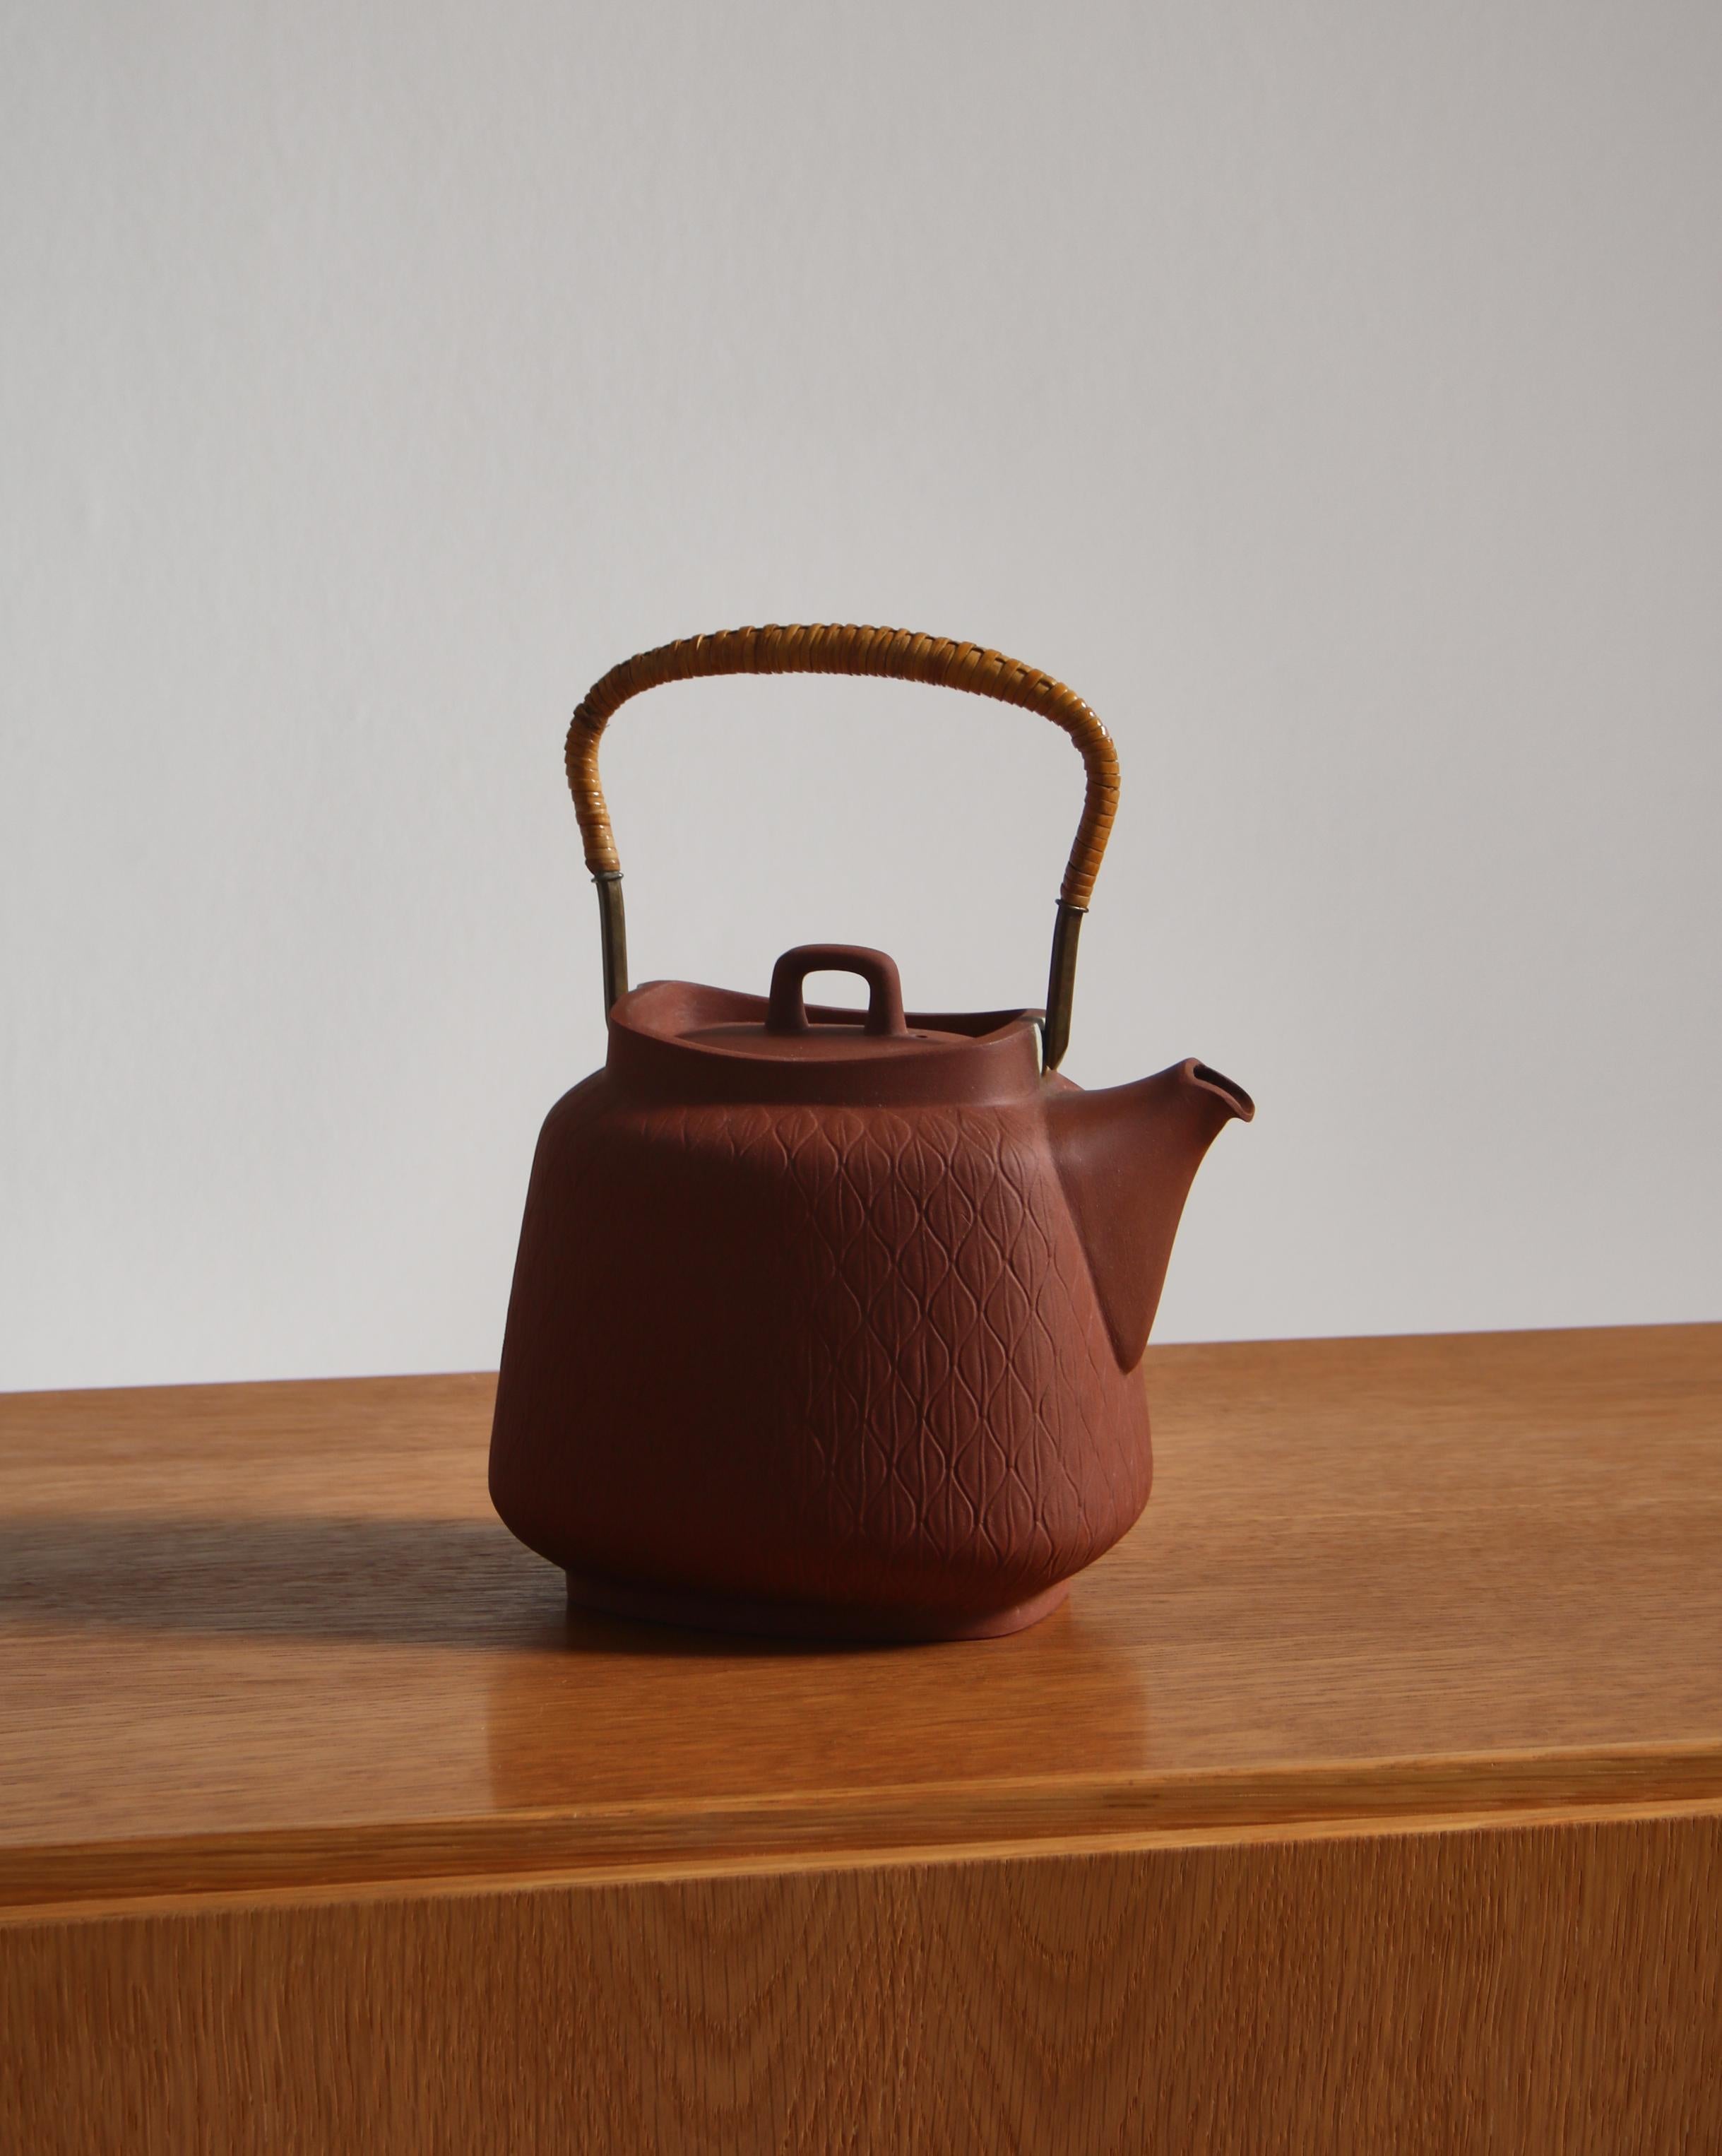 Wonderful teapot by Jens Harald Quistgaard in fired chamotte clay with handle of cane. Made at 